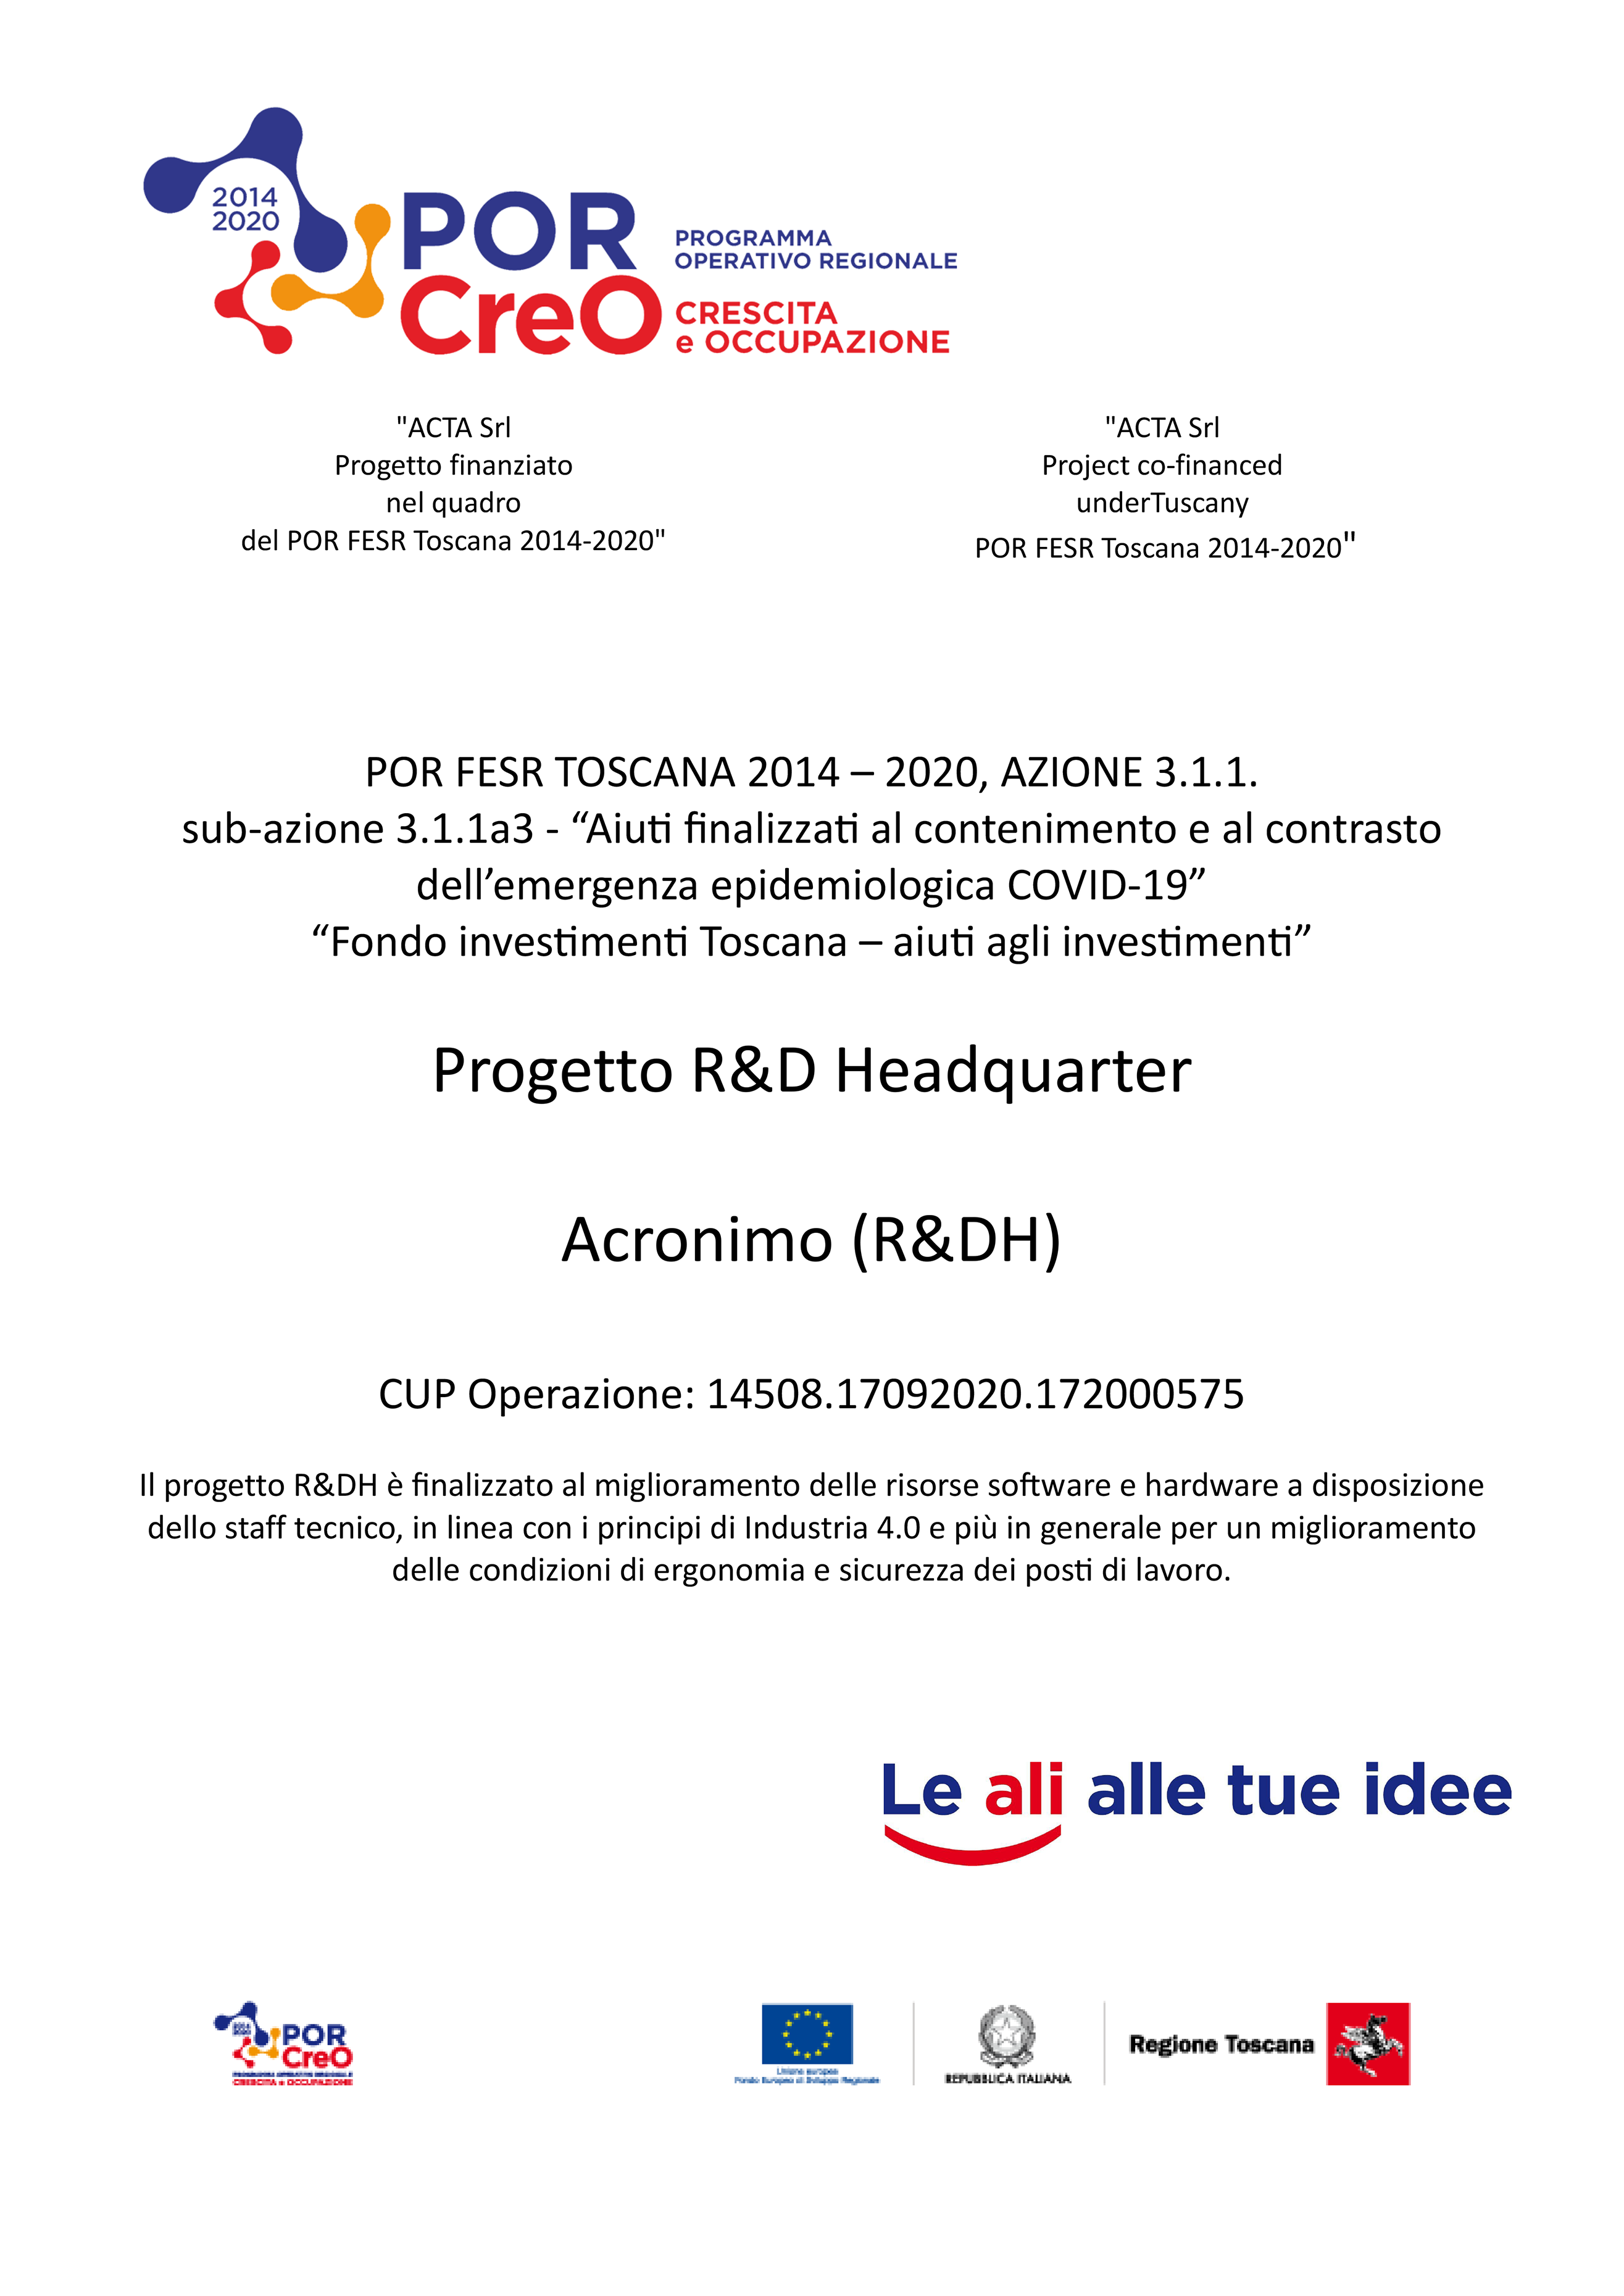 Completion of the report of the  “R&D Headquarter” project